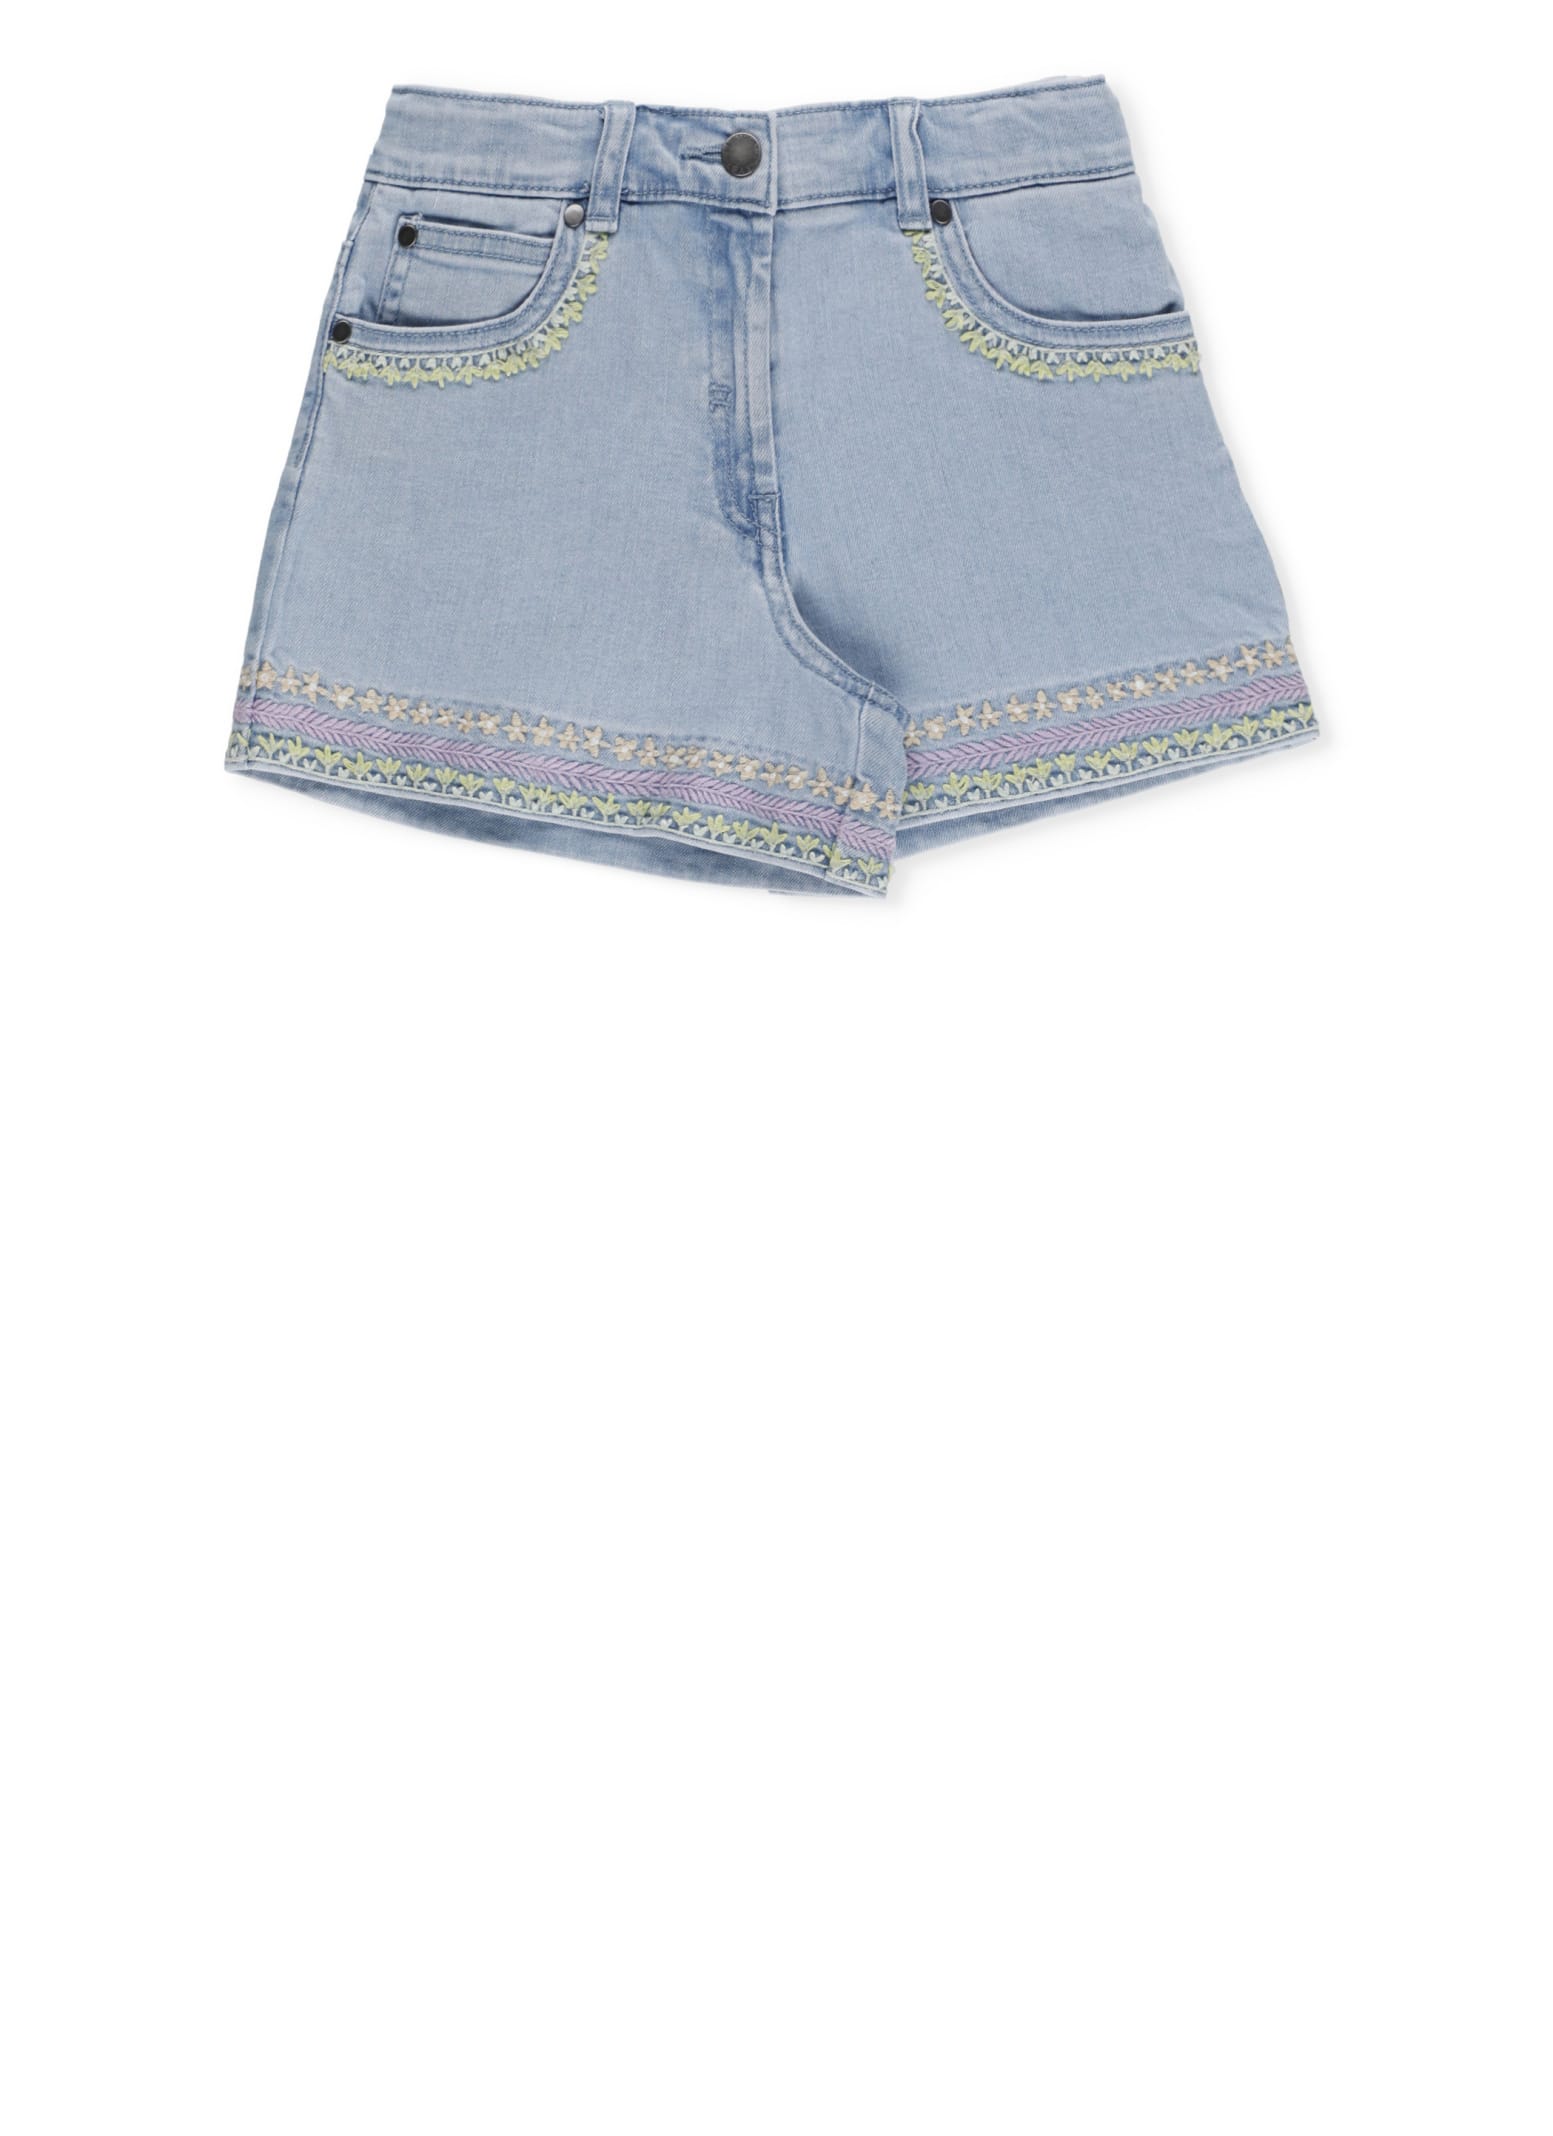 STELLA MCCARTNEY COTTON SHORTS WITH EMBROIDERIES